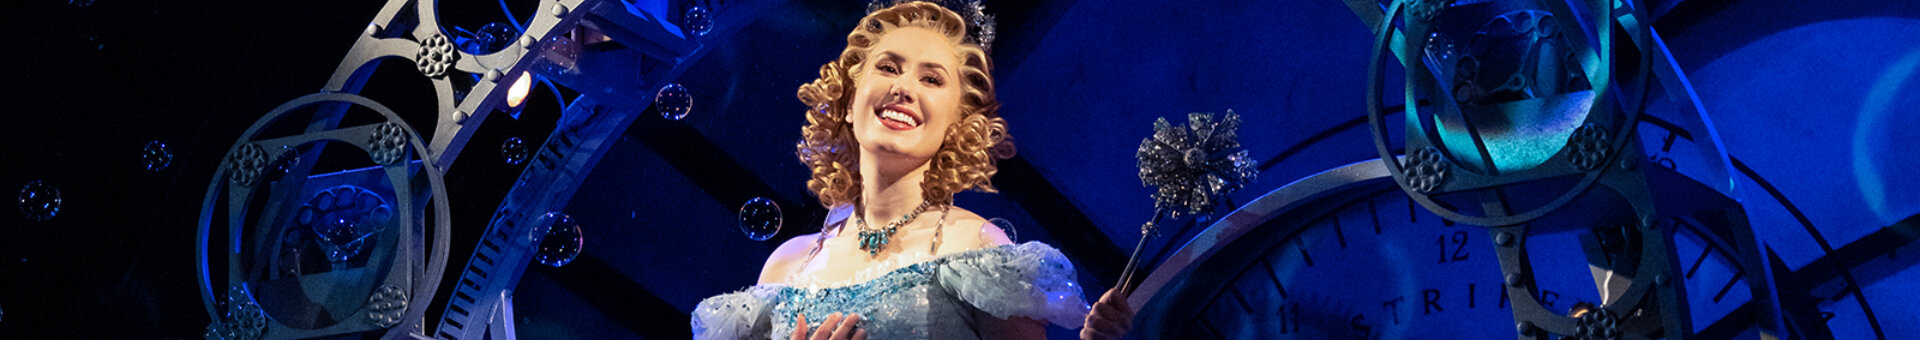 12 Best Broadway Shows Right Now